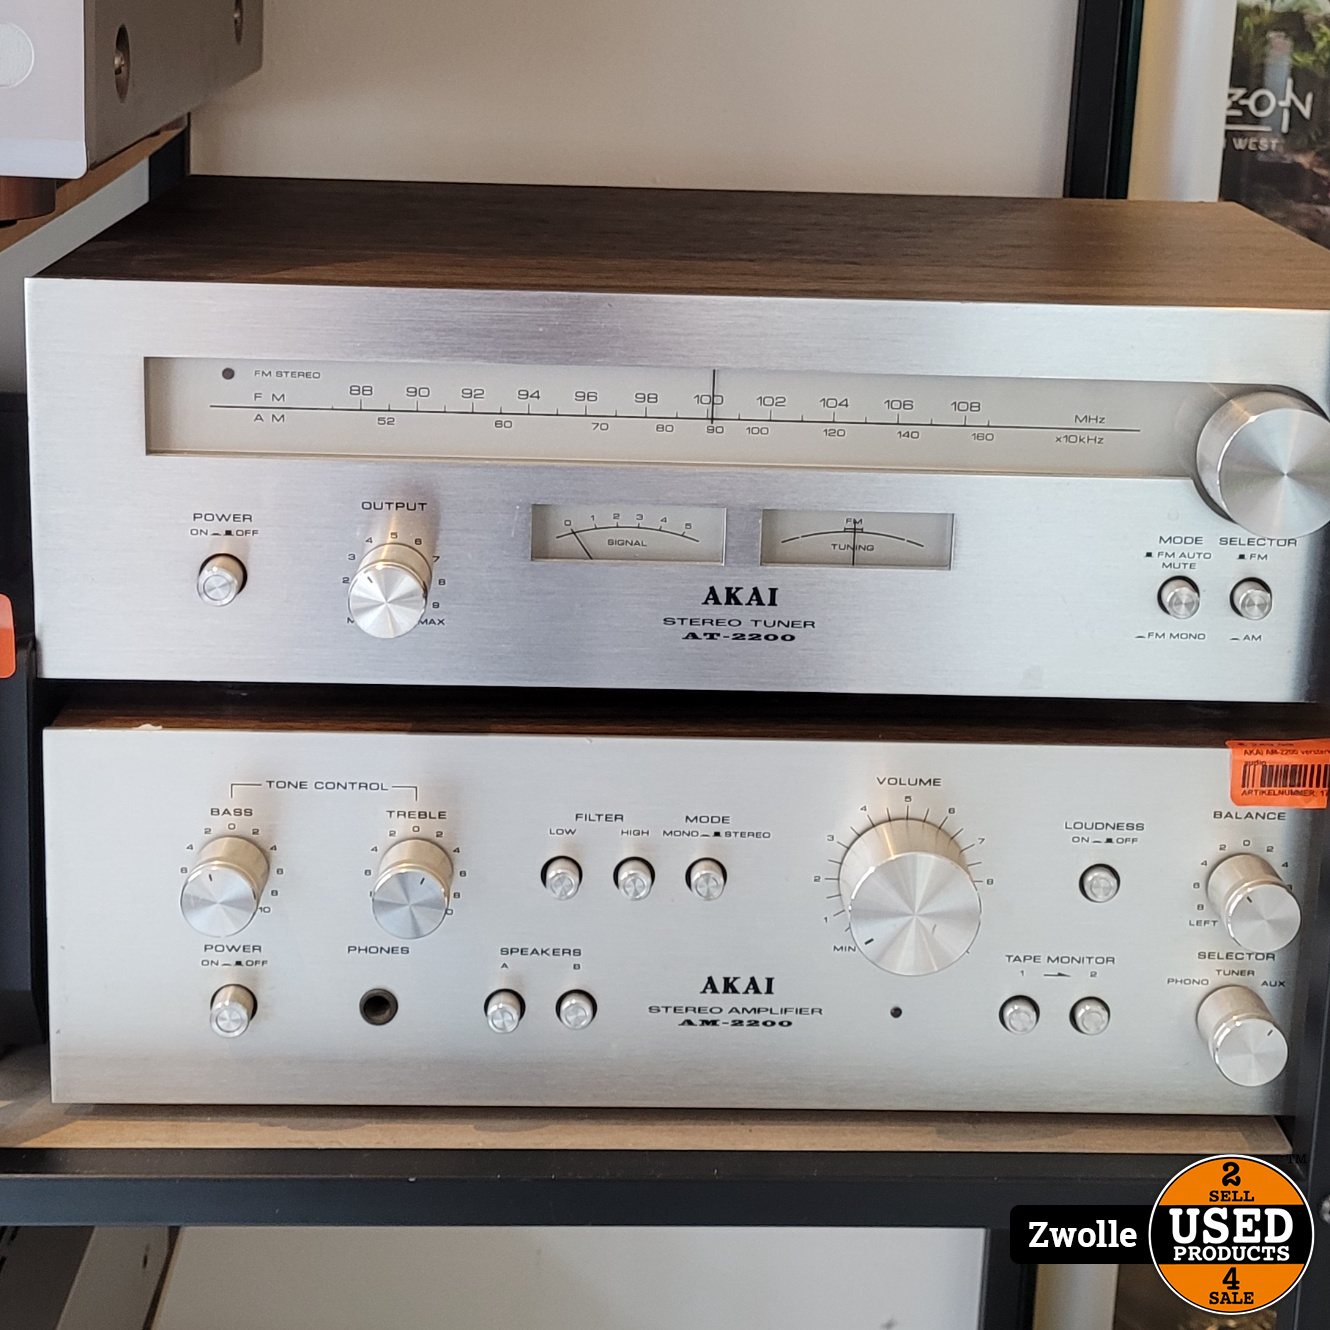 AM-2200 | vintage audio - Used Products Zwolle